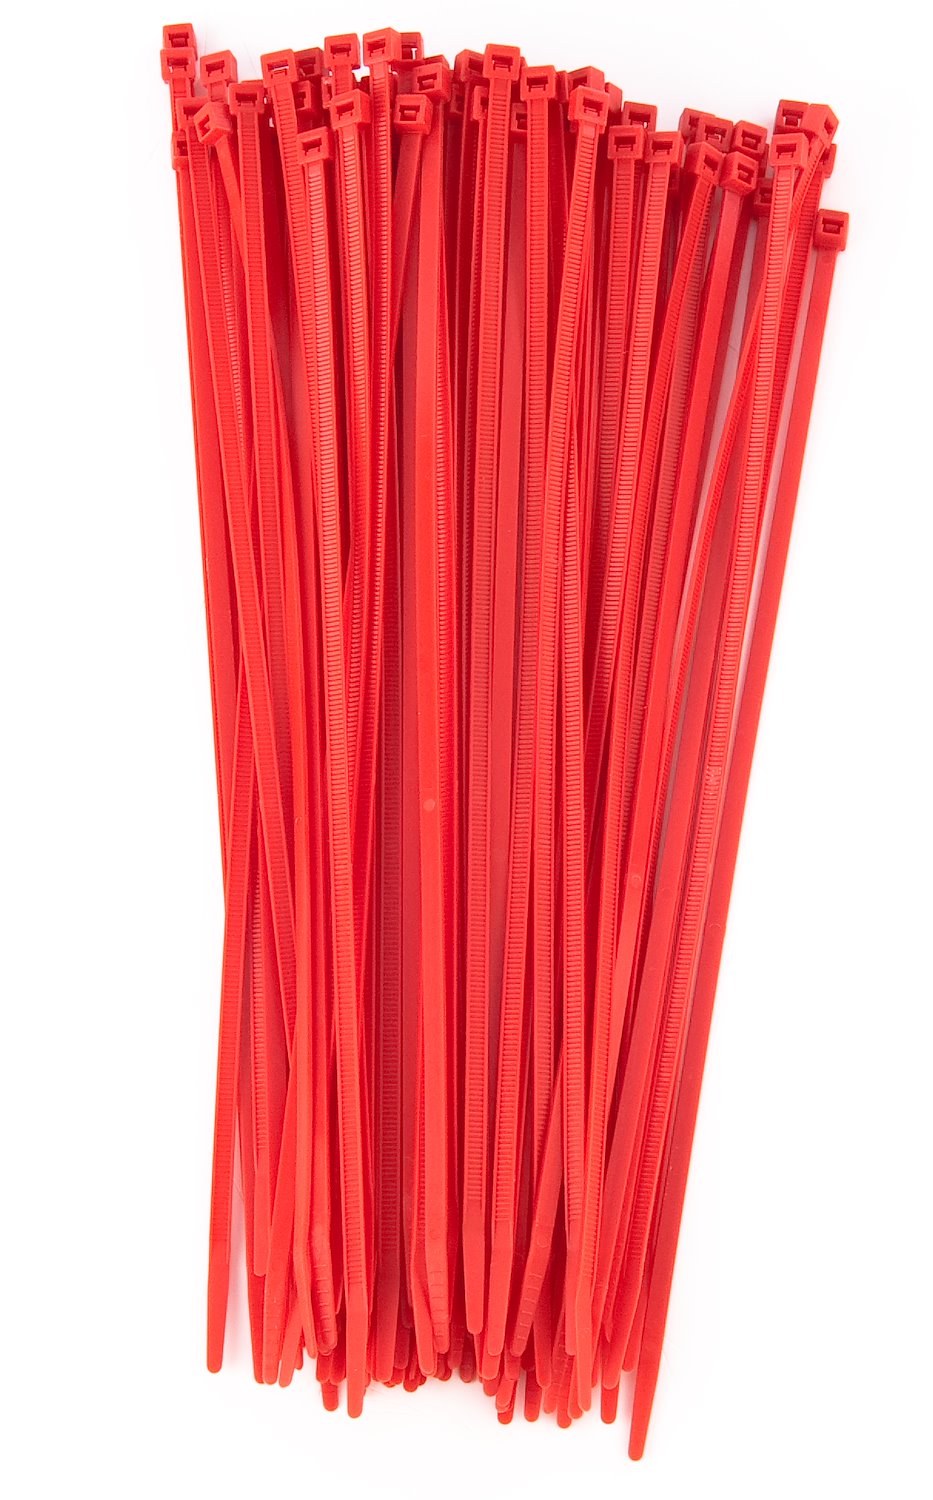 Nylon Wire and Cable Ties [11 in. Red]